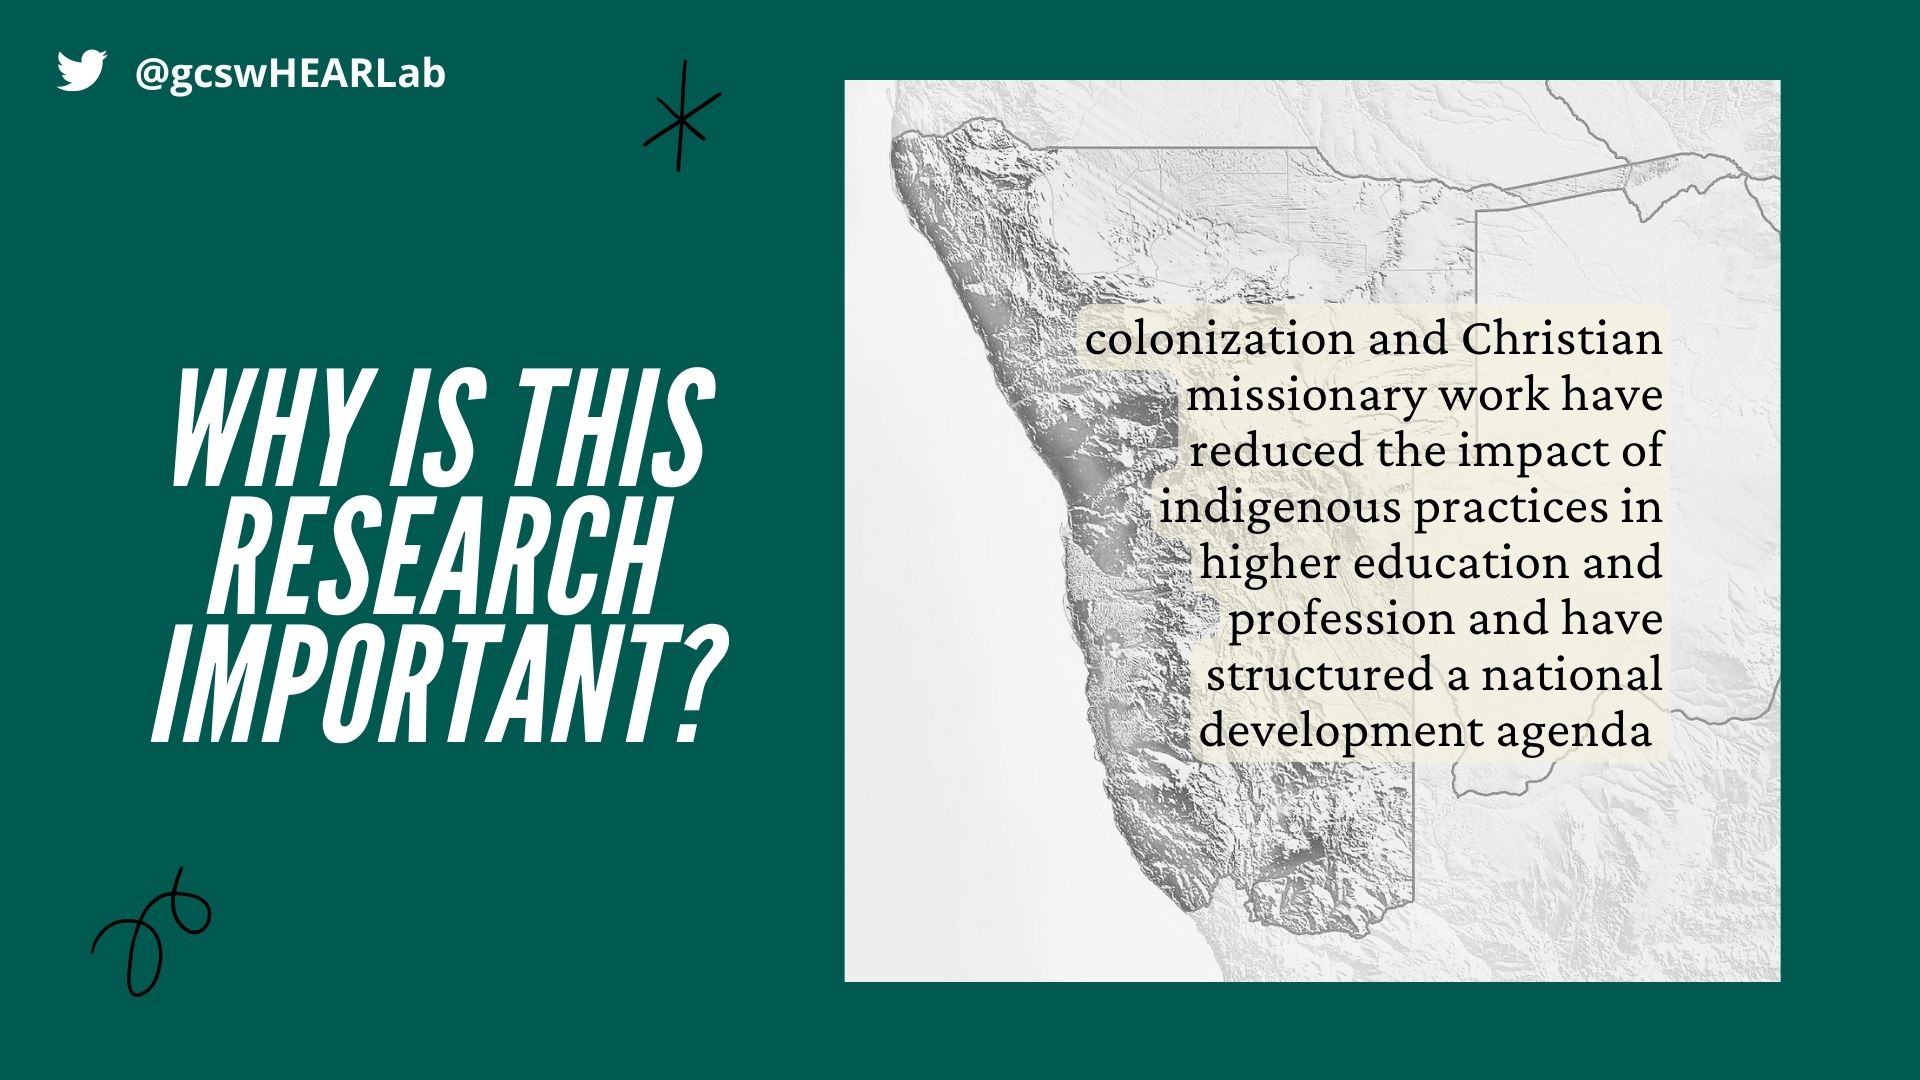 why is this research important? colonization and Christian missionary work have reduced the impact of indigenous practices in higher education and profession and have structured a national development agenda 